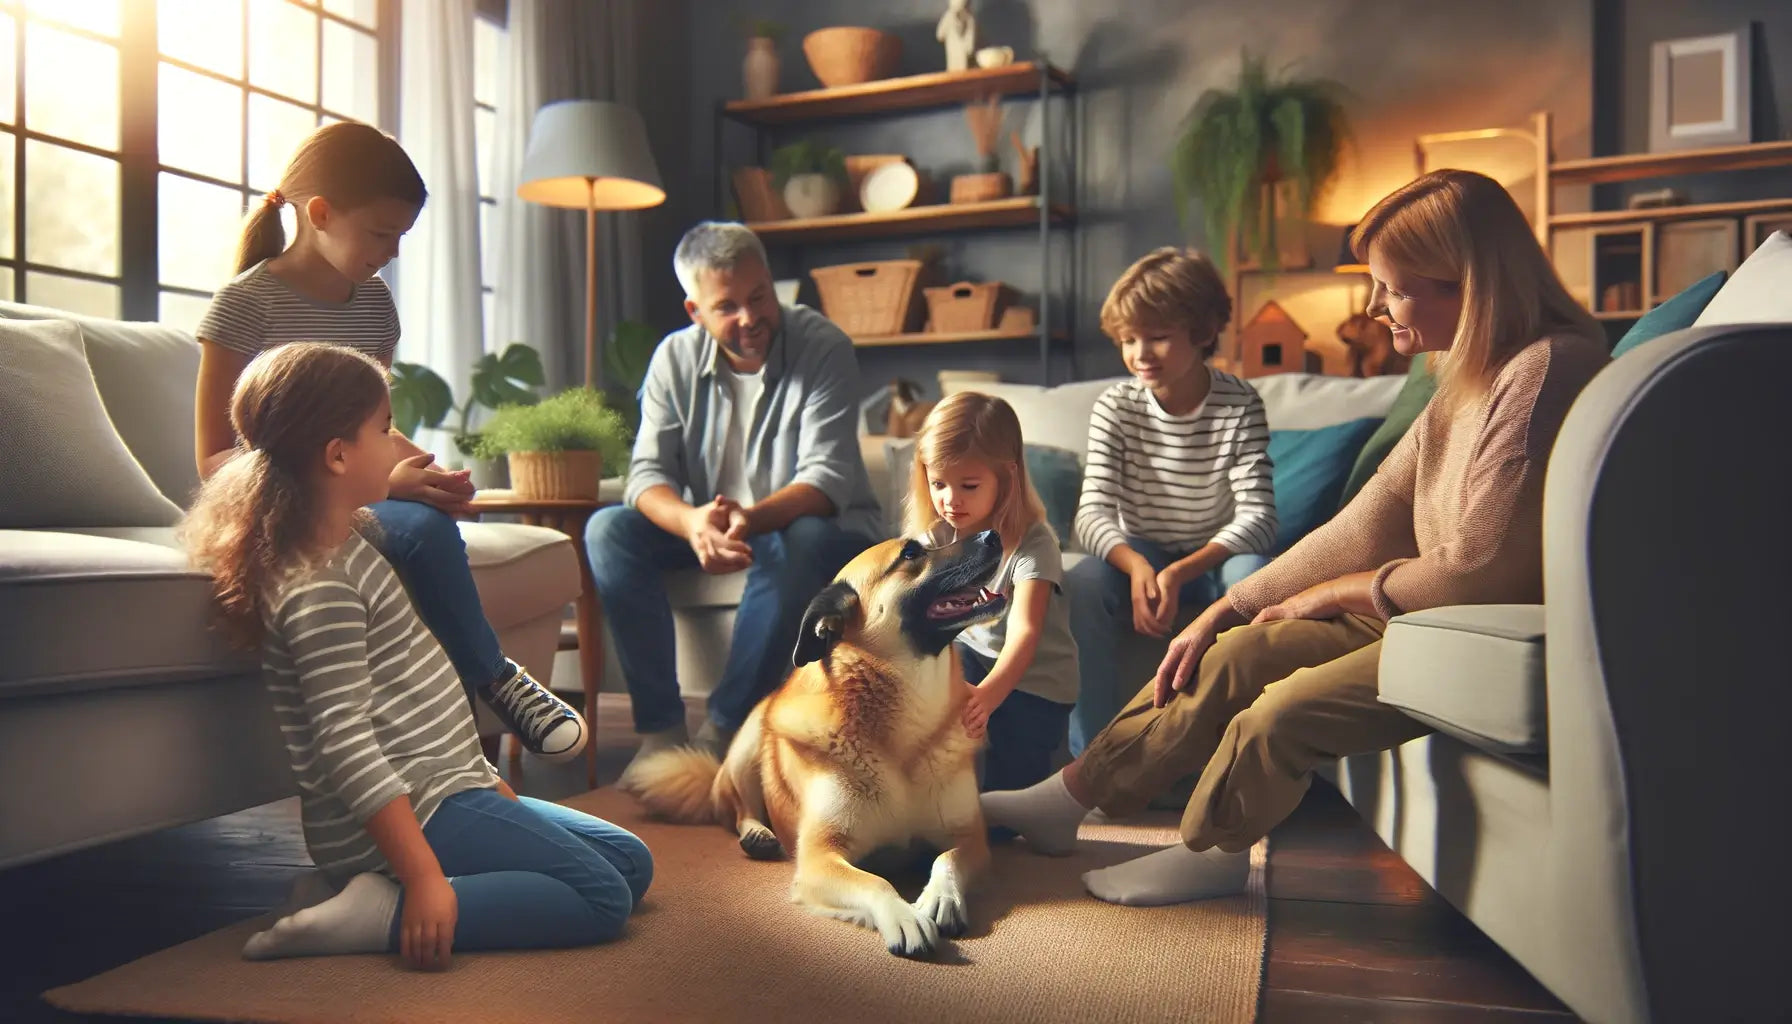 Potcake Dog in the heart of a family setting surrounded by children and adults in a cozy living room.